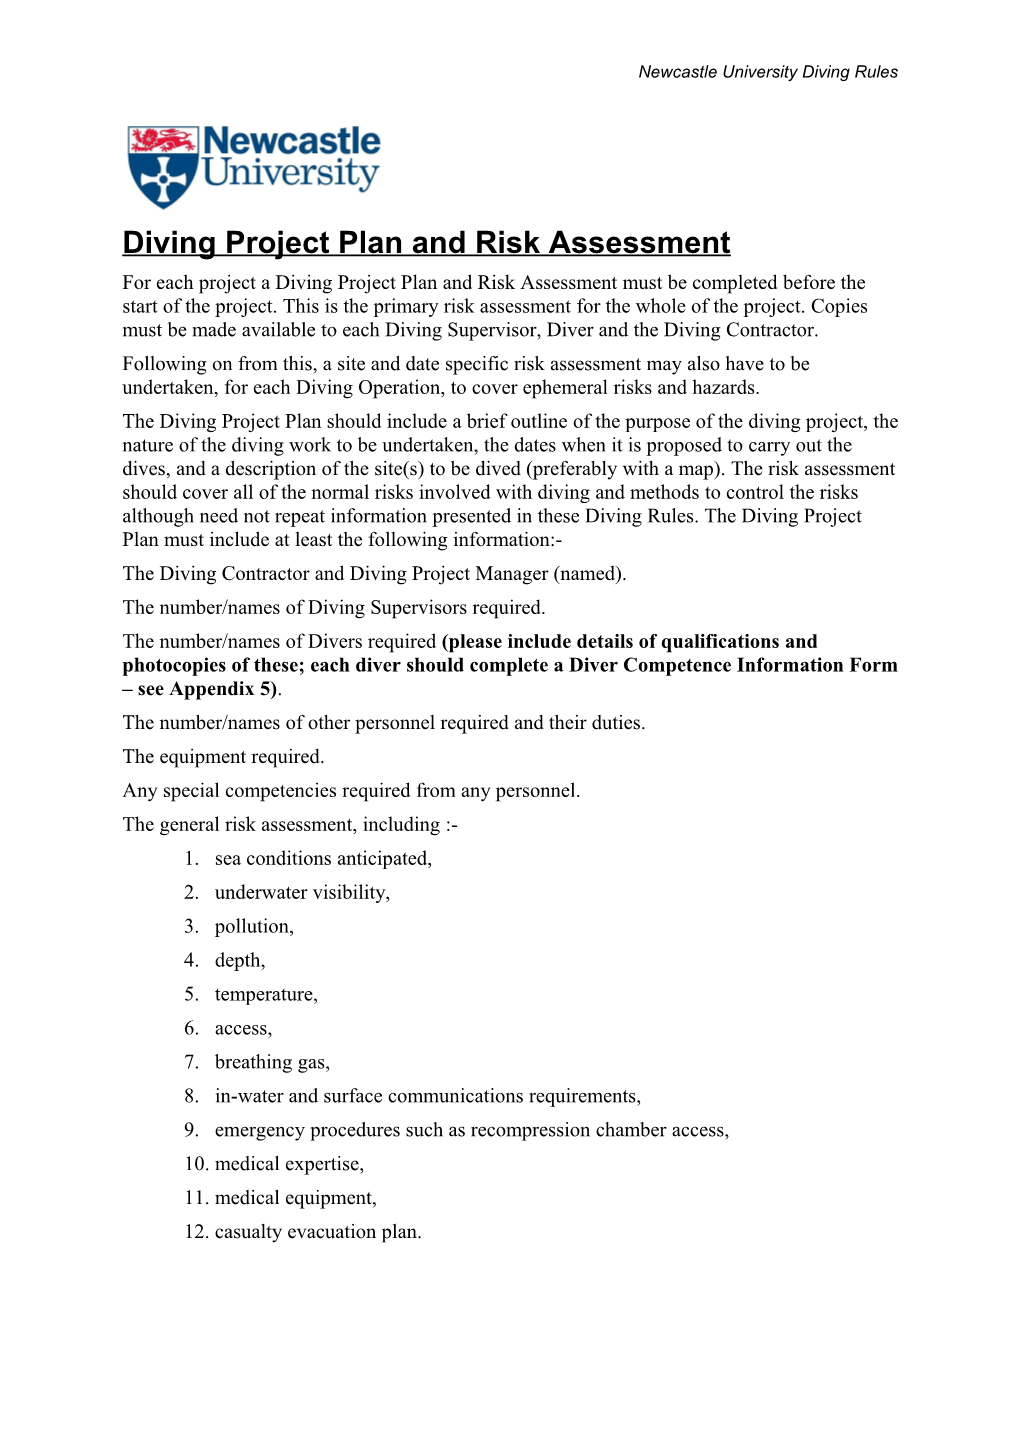 Diving Project Plan and Risk Assessment